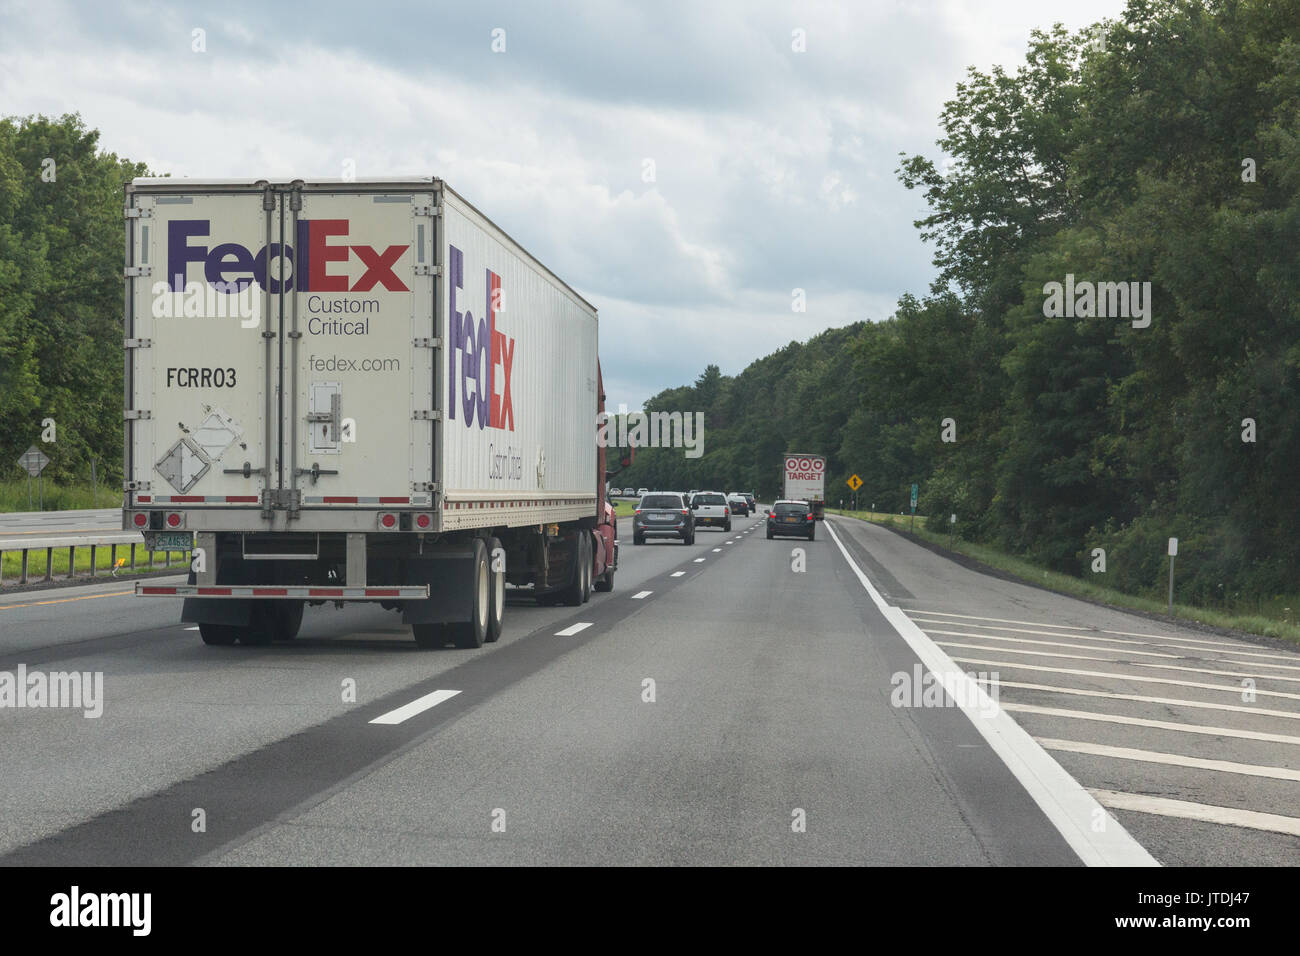 FedEx delivery lorry on a busy motorway Stock Photo